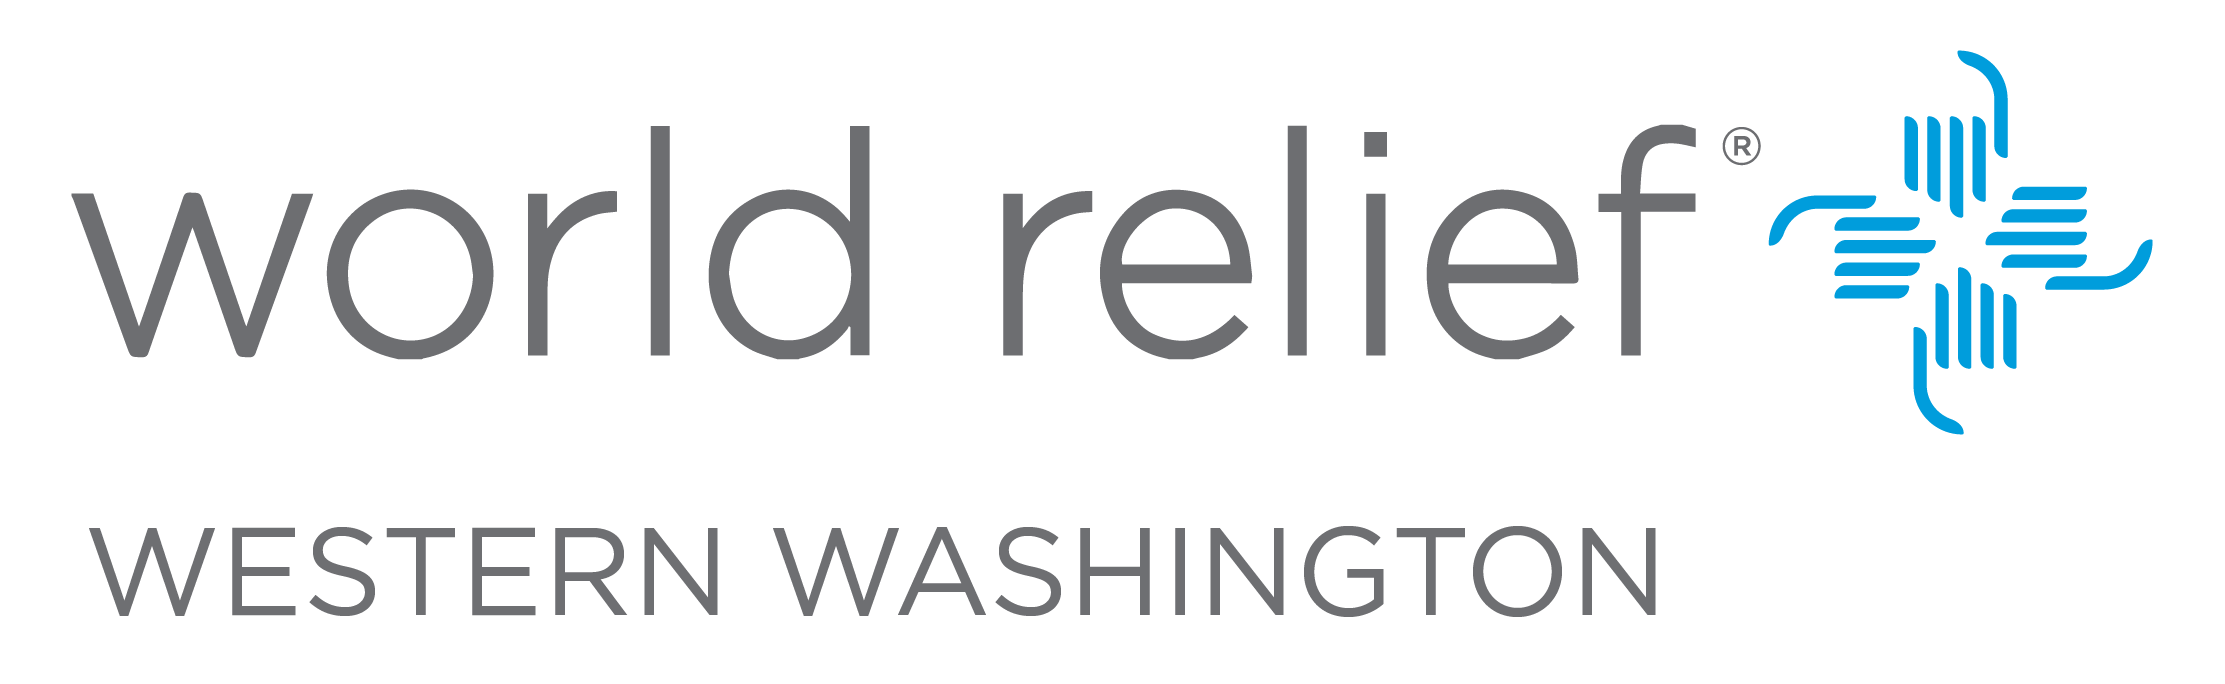 World Relief Western Washington logo made up of grey text and a blue decorative plus like shape.